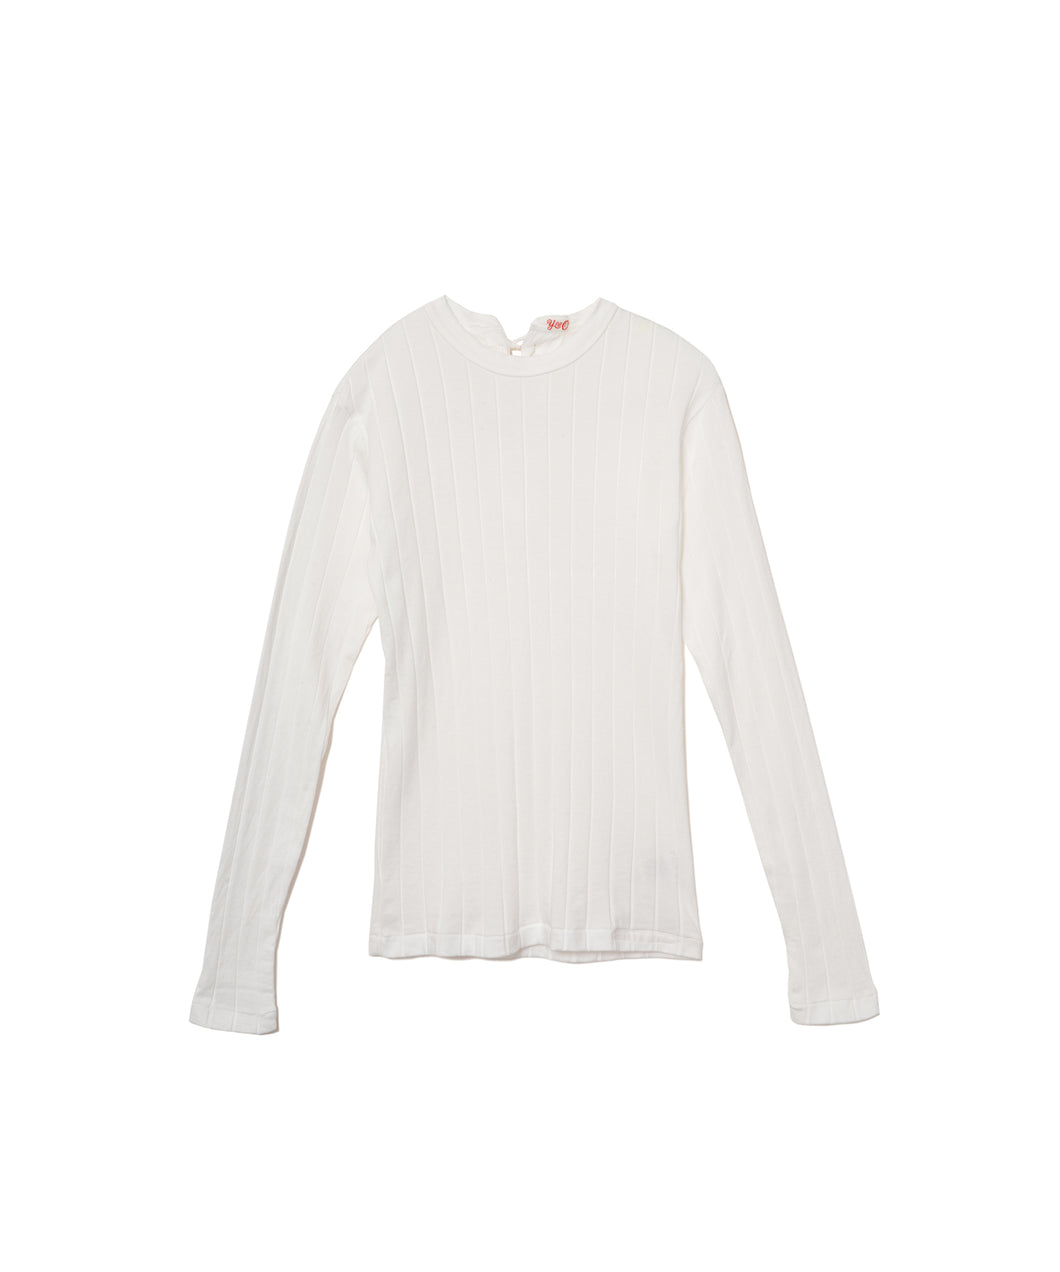 【WOMEN】YOUNG & OLSEN TDS BROAD RIB BACKLACE LS